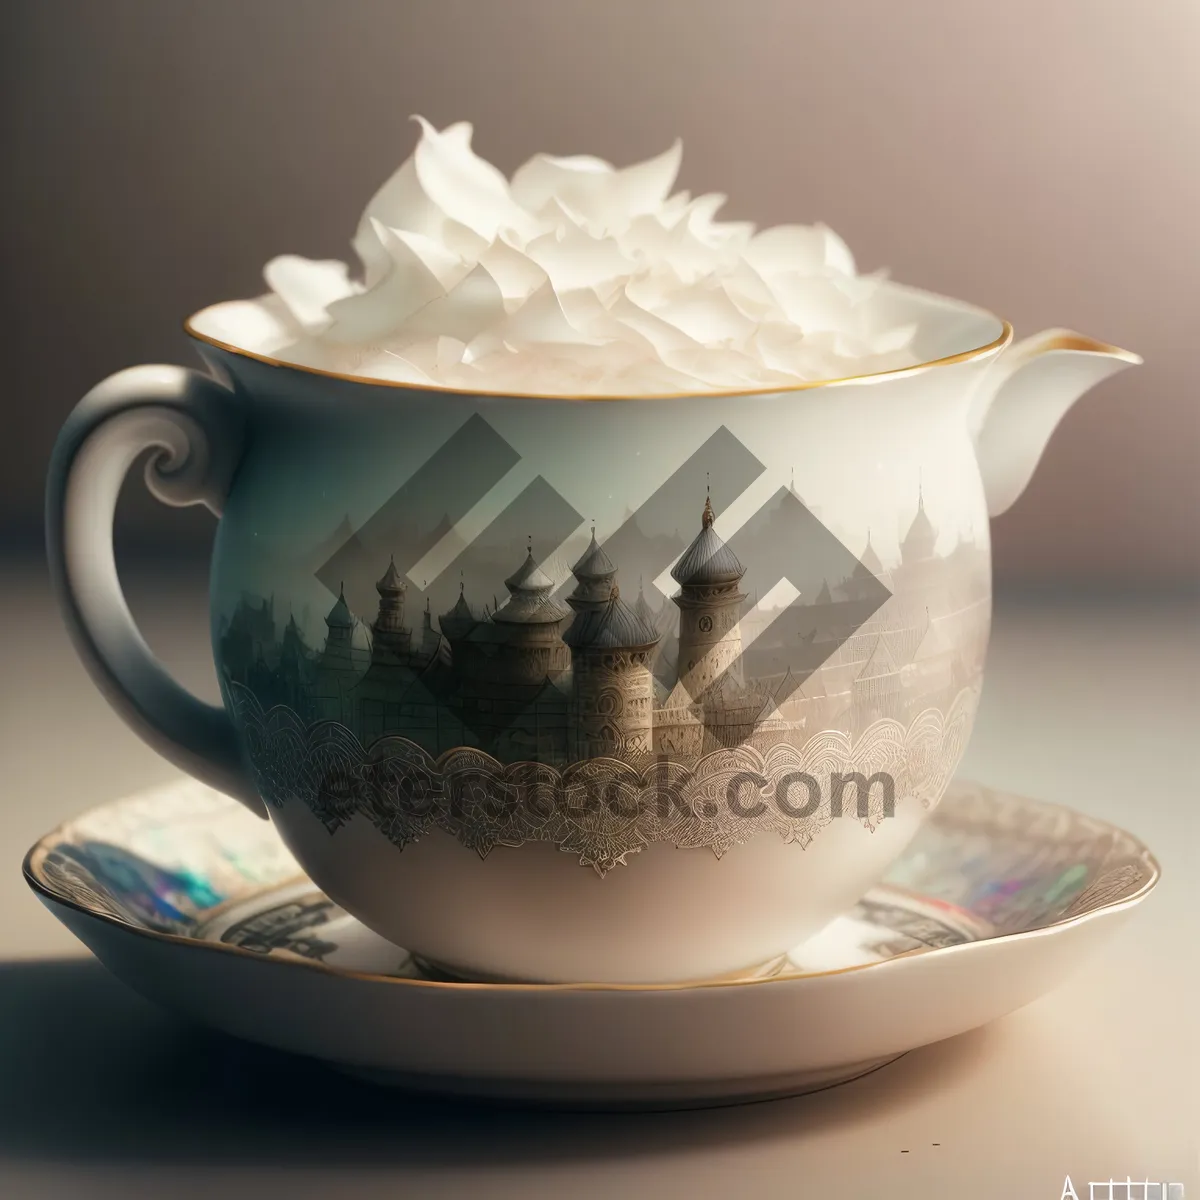 Picture of Ceramic Tea Cup with Saucer for Morning Beverages